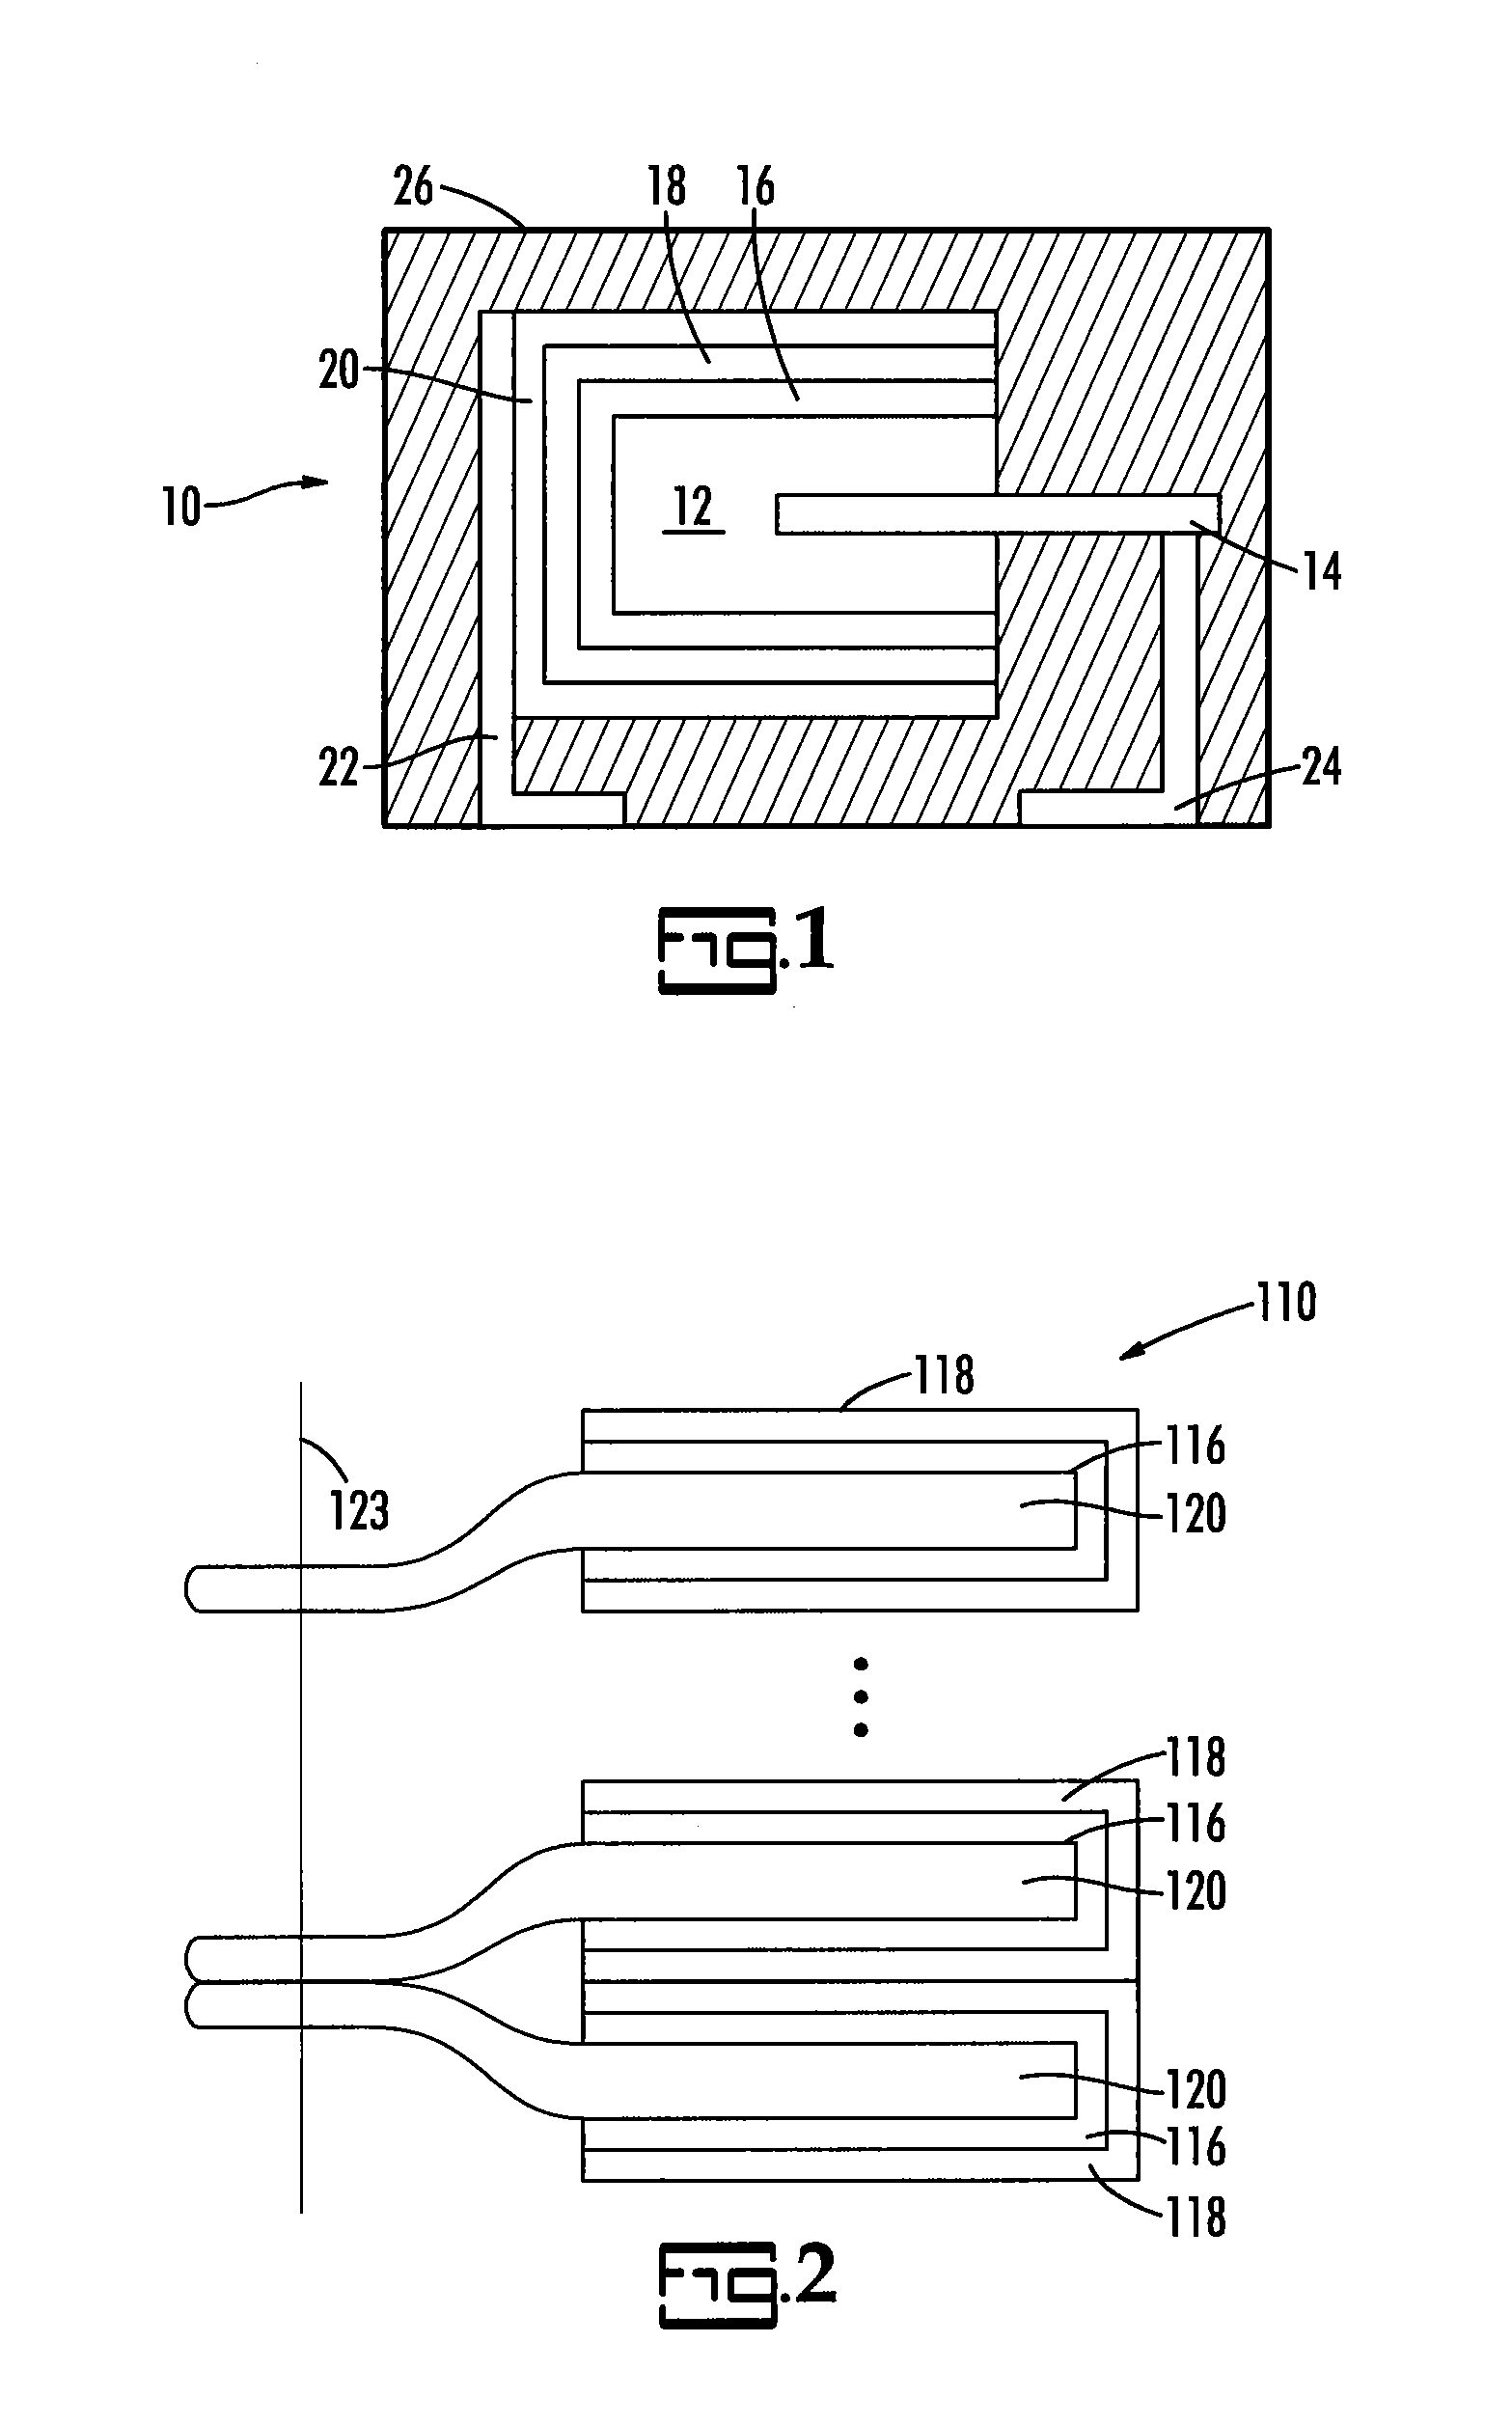 Process for producing electrolytic capacitors and capacitors made thereby